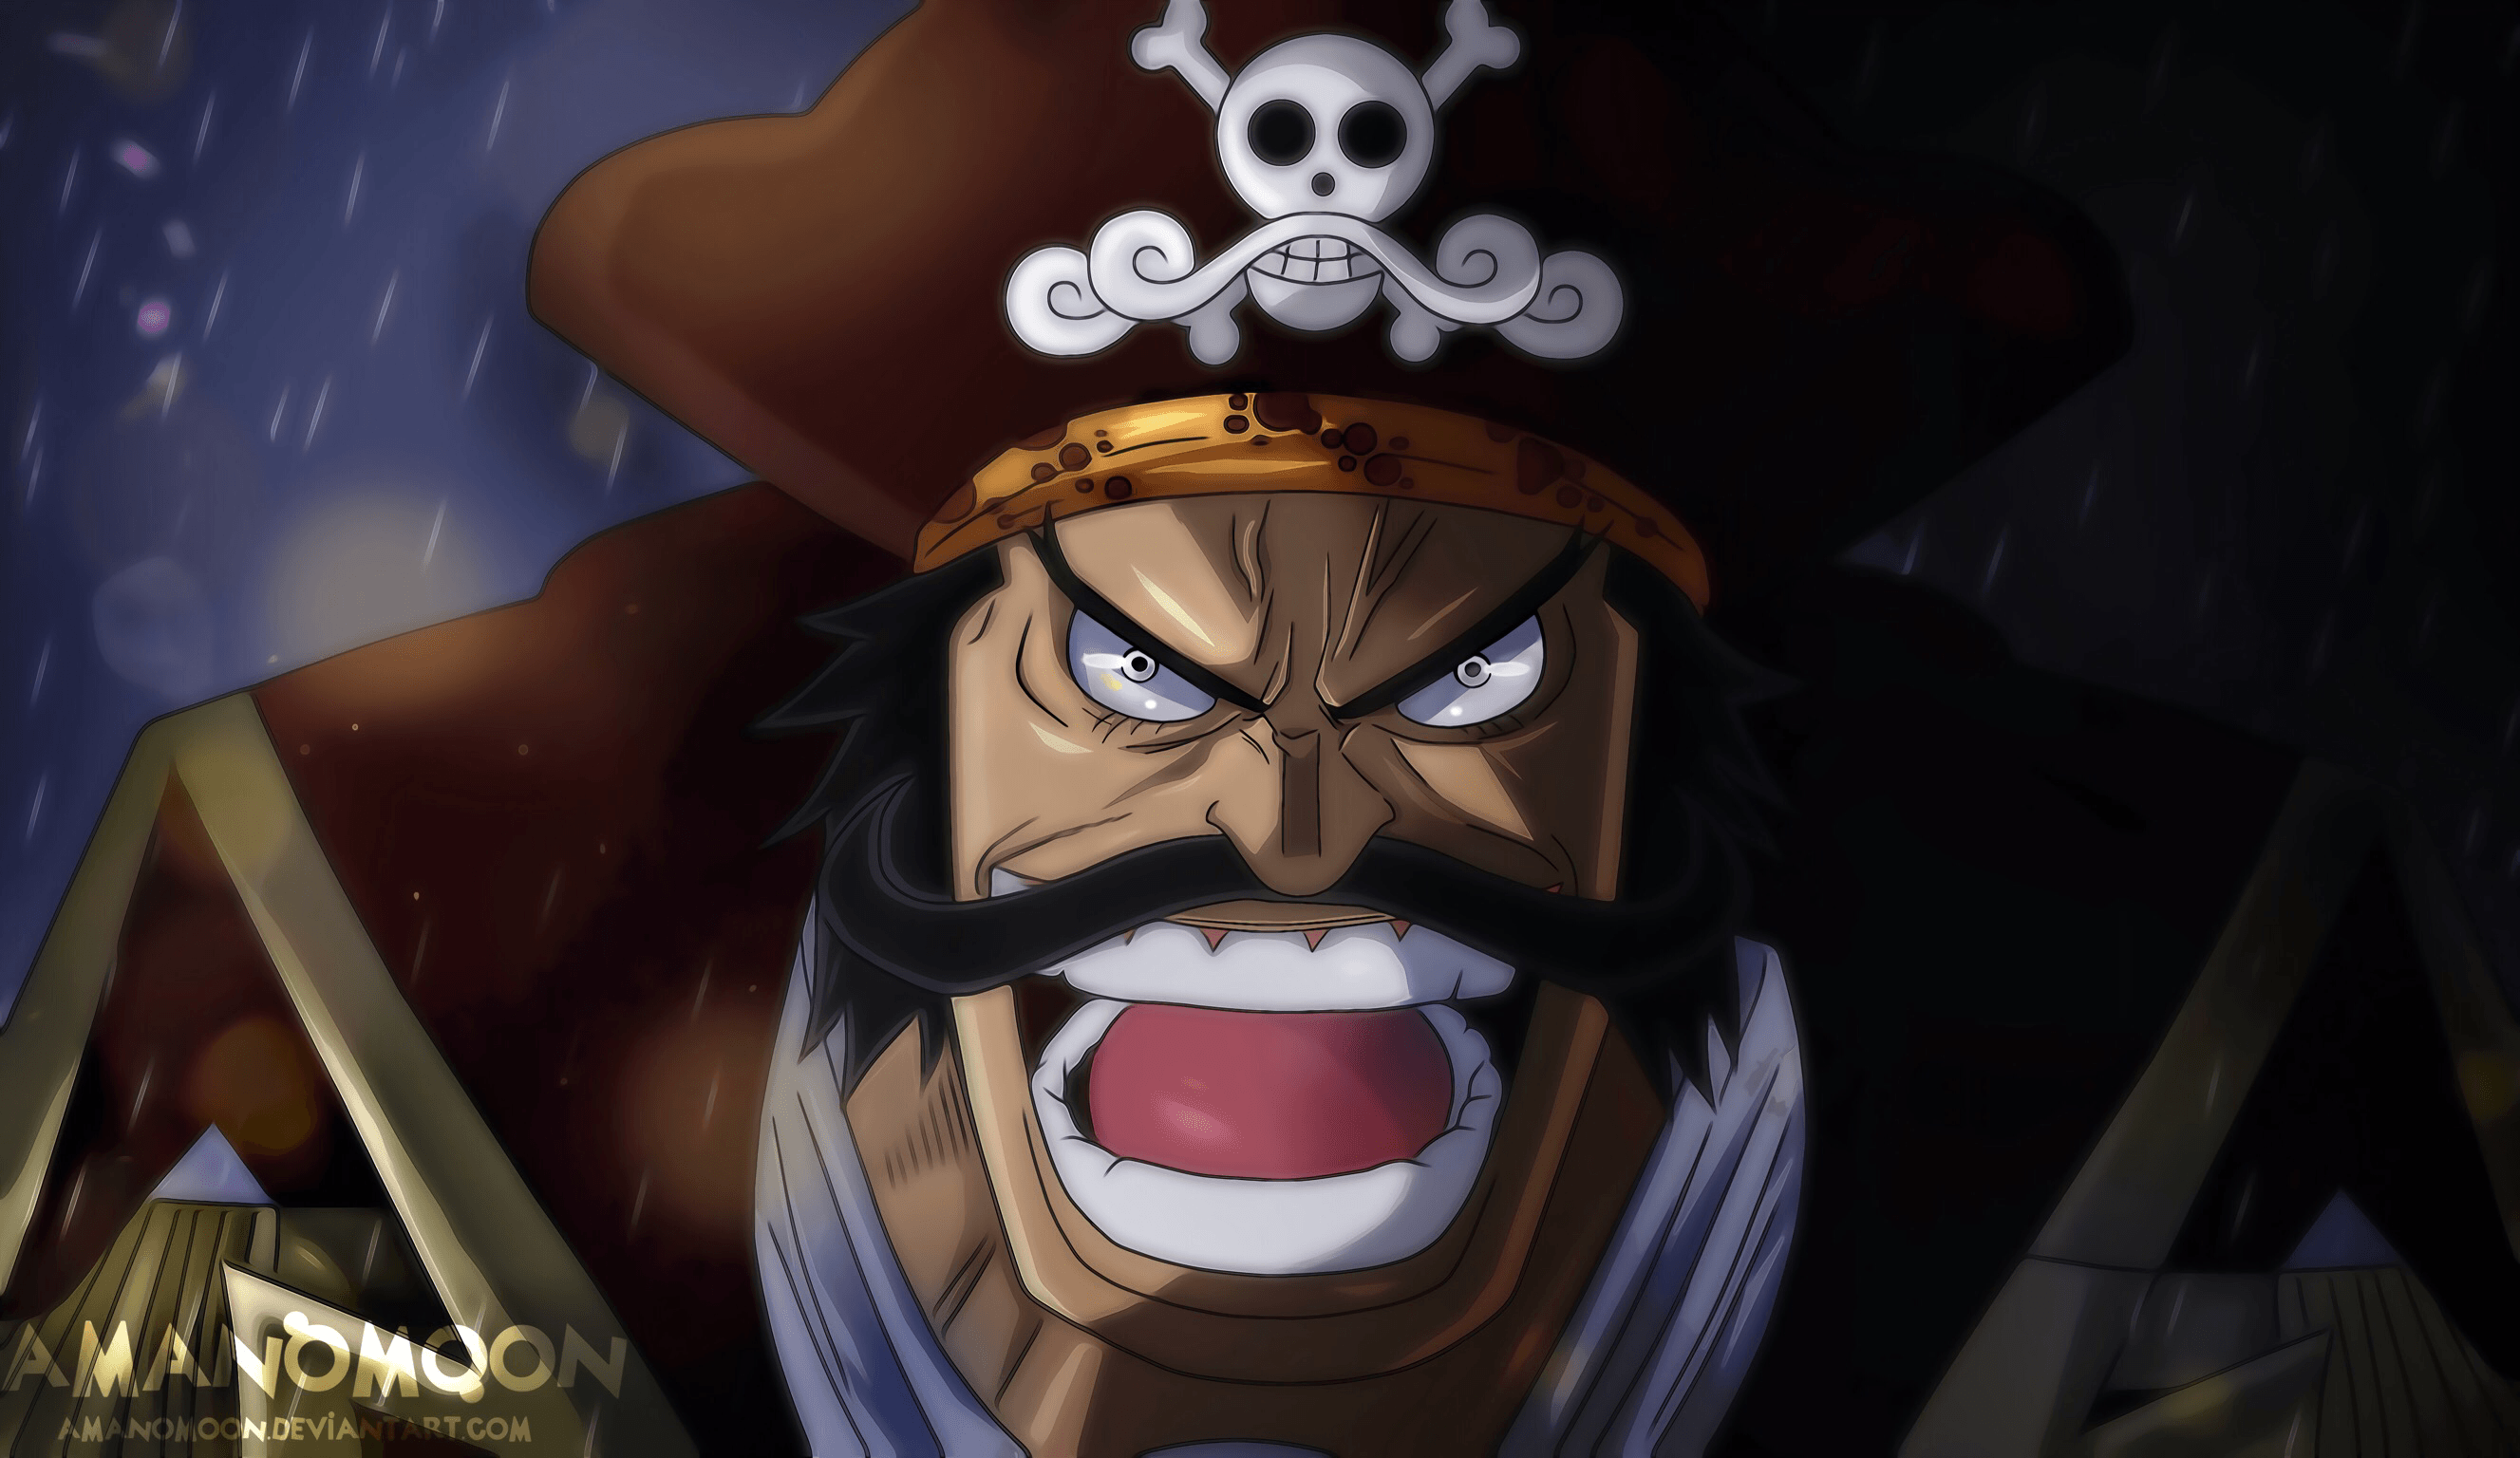 Wallpaper, Gold D Roger, One Piece, pirate king, Amanomoon